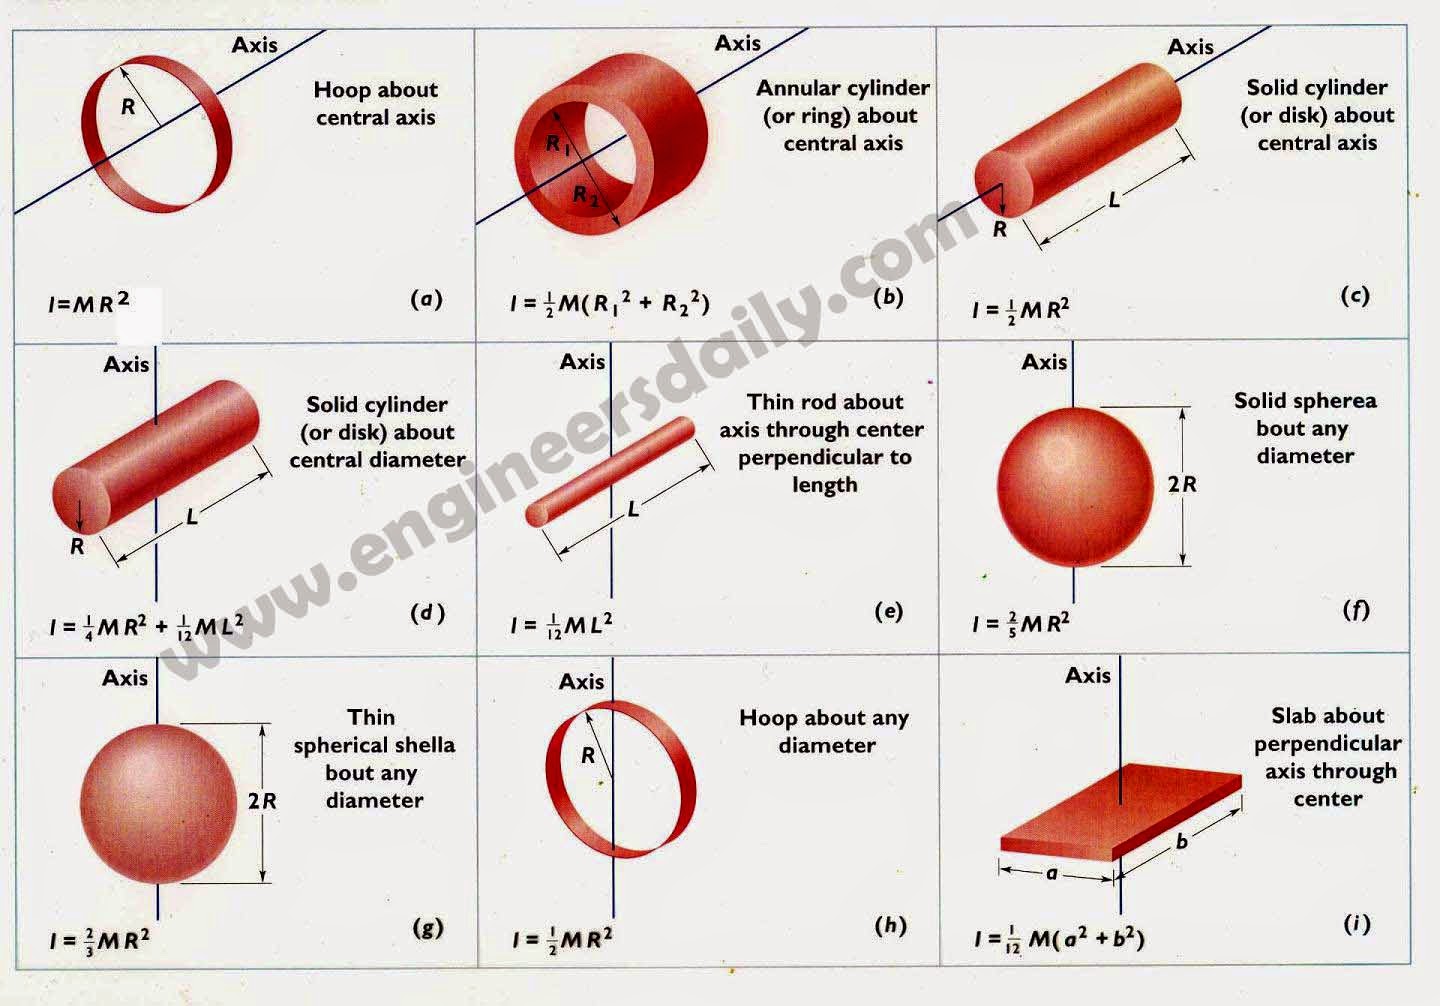 Basic Concepts of Moment of Intertia (Rotational Analog of Mass)